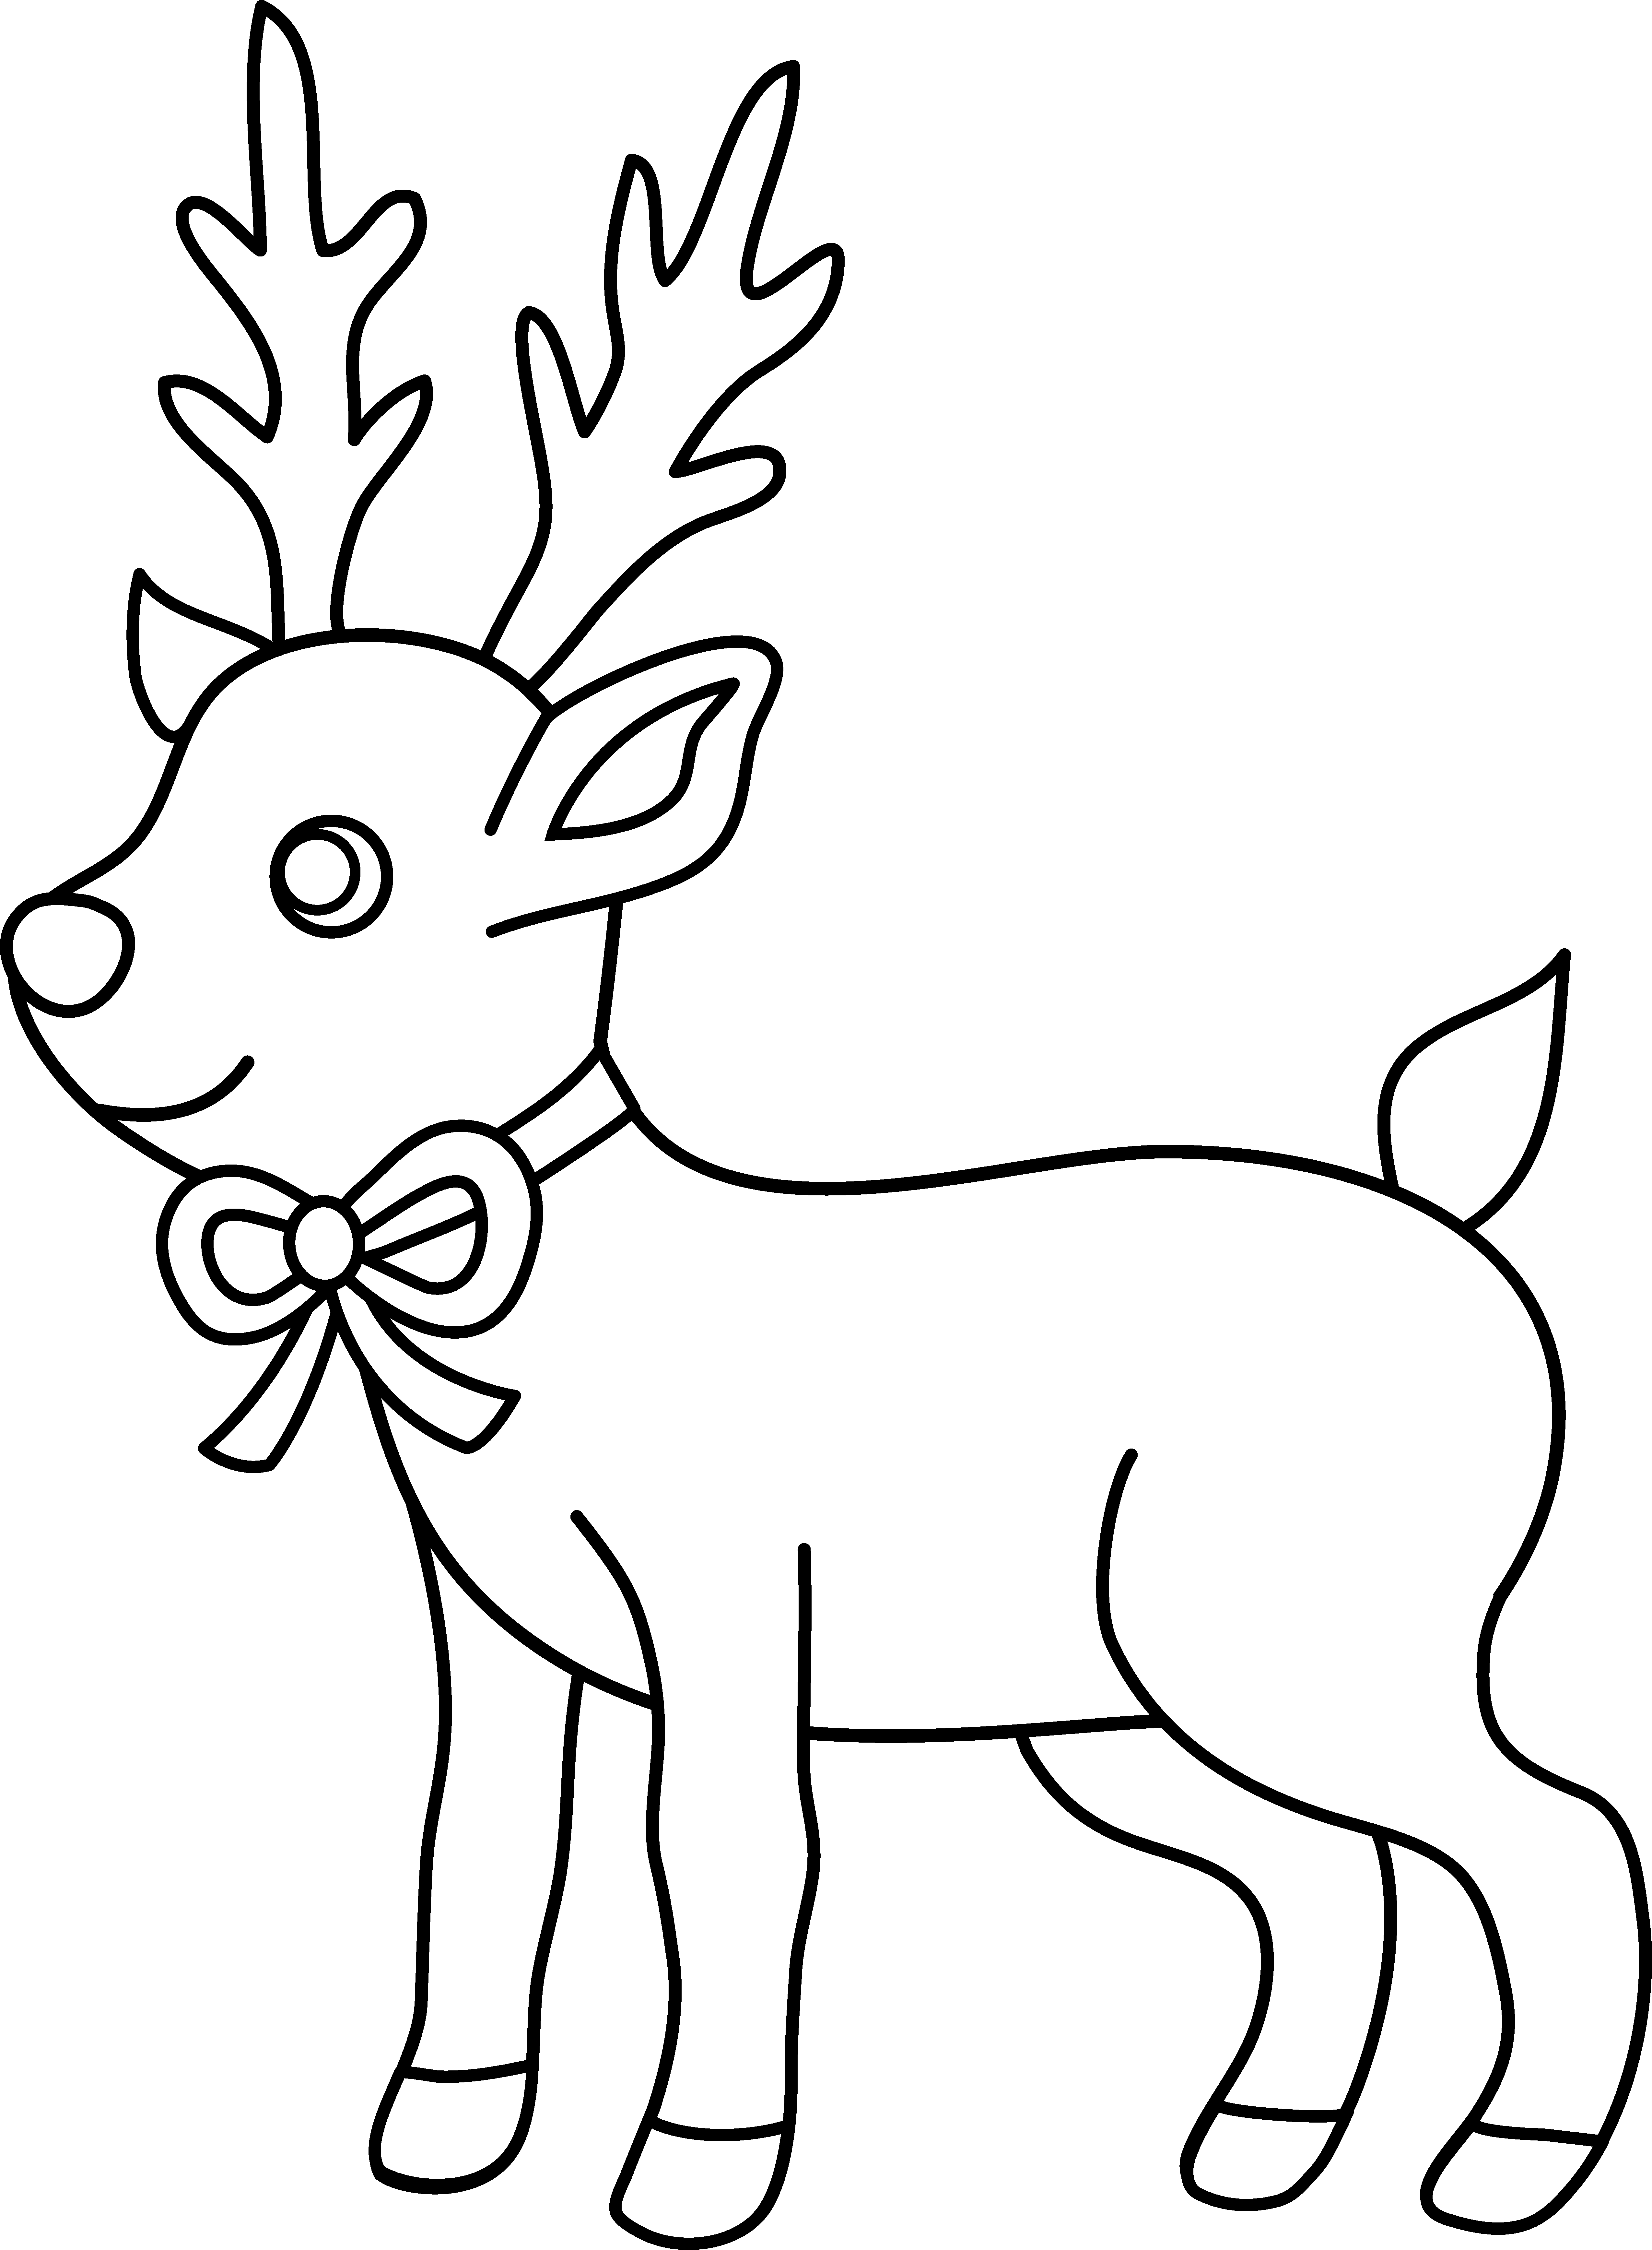  collection of precious. Deer clipart coloring page